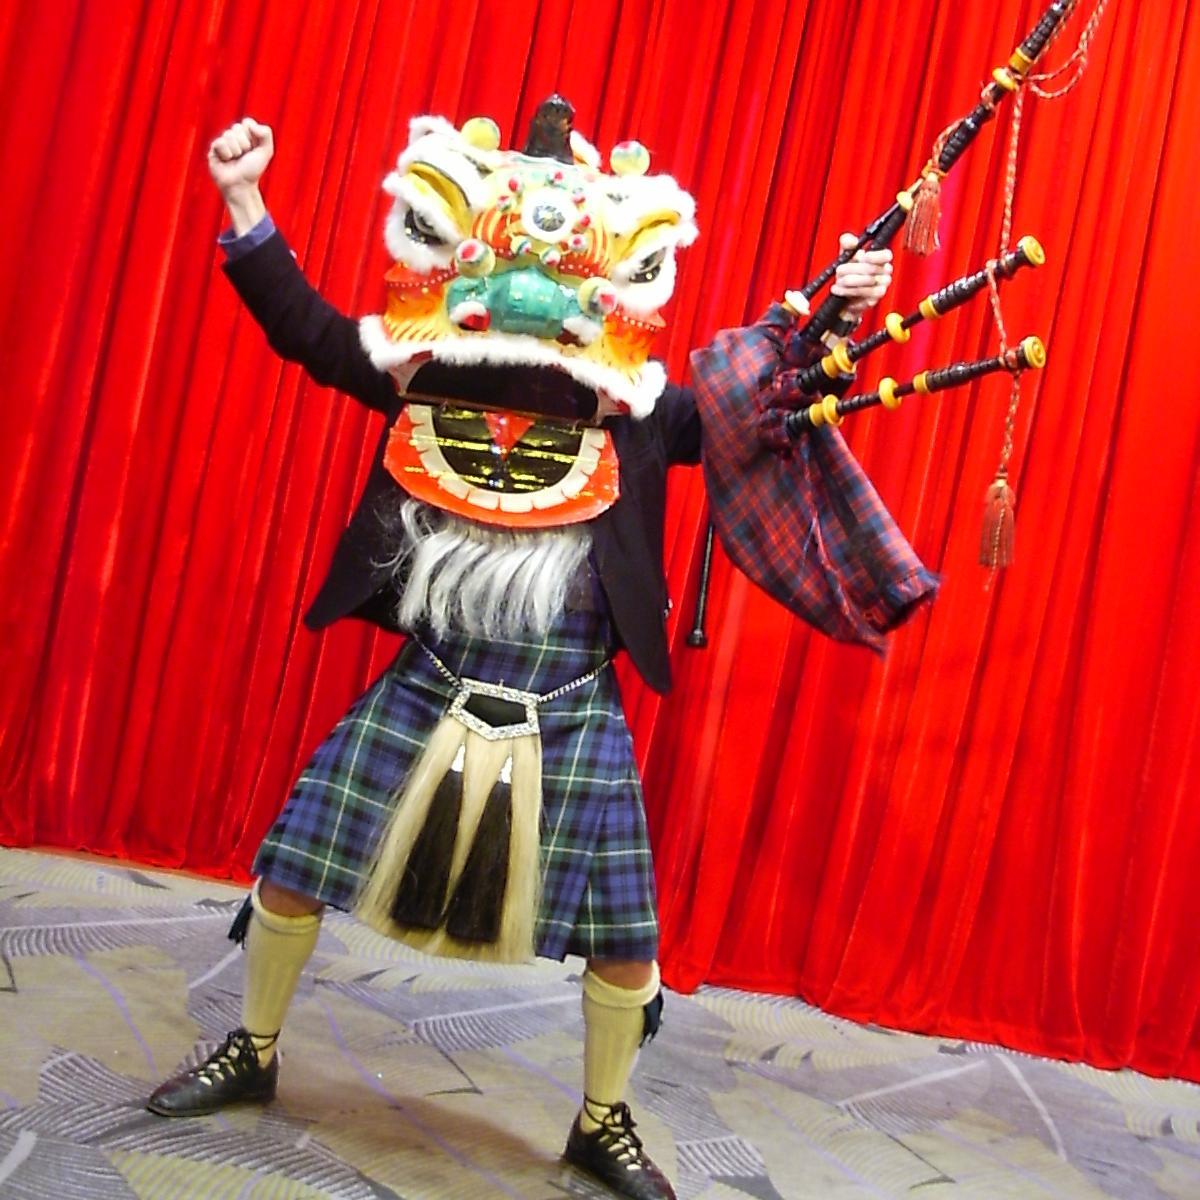 Gung Haggis Fat Choy celebrates fusion of Scottish Robbie Burns Day + Chinese New Year cultures and traditions. Founder of #GungHaggis and President of @ACWW